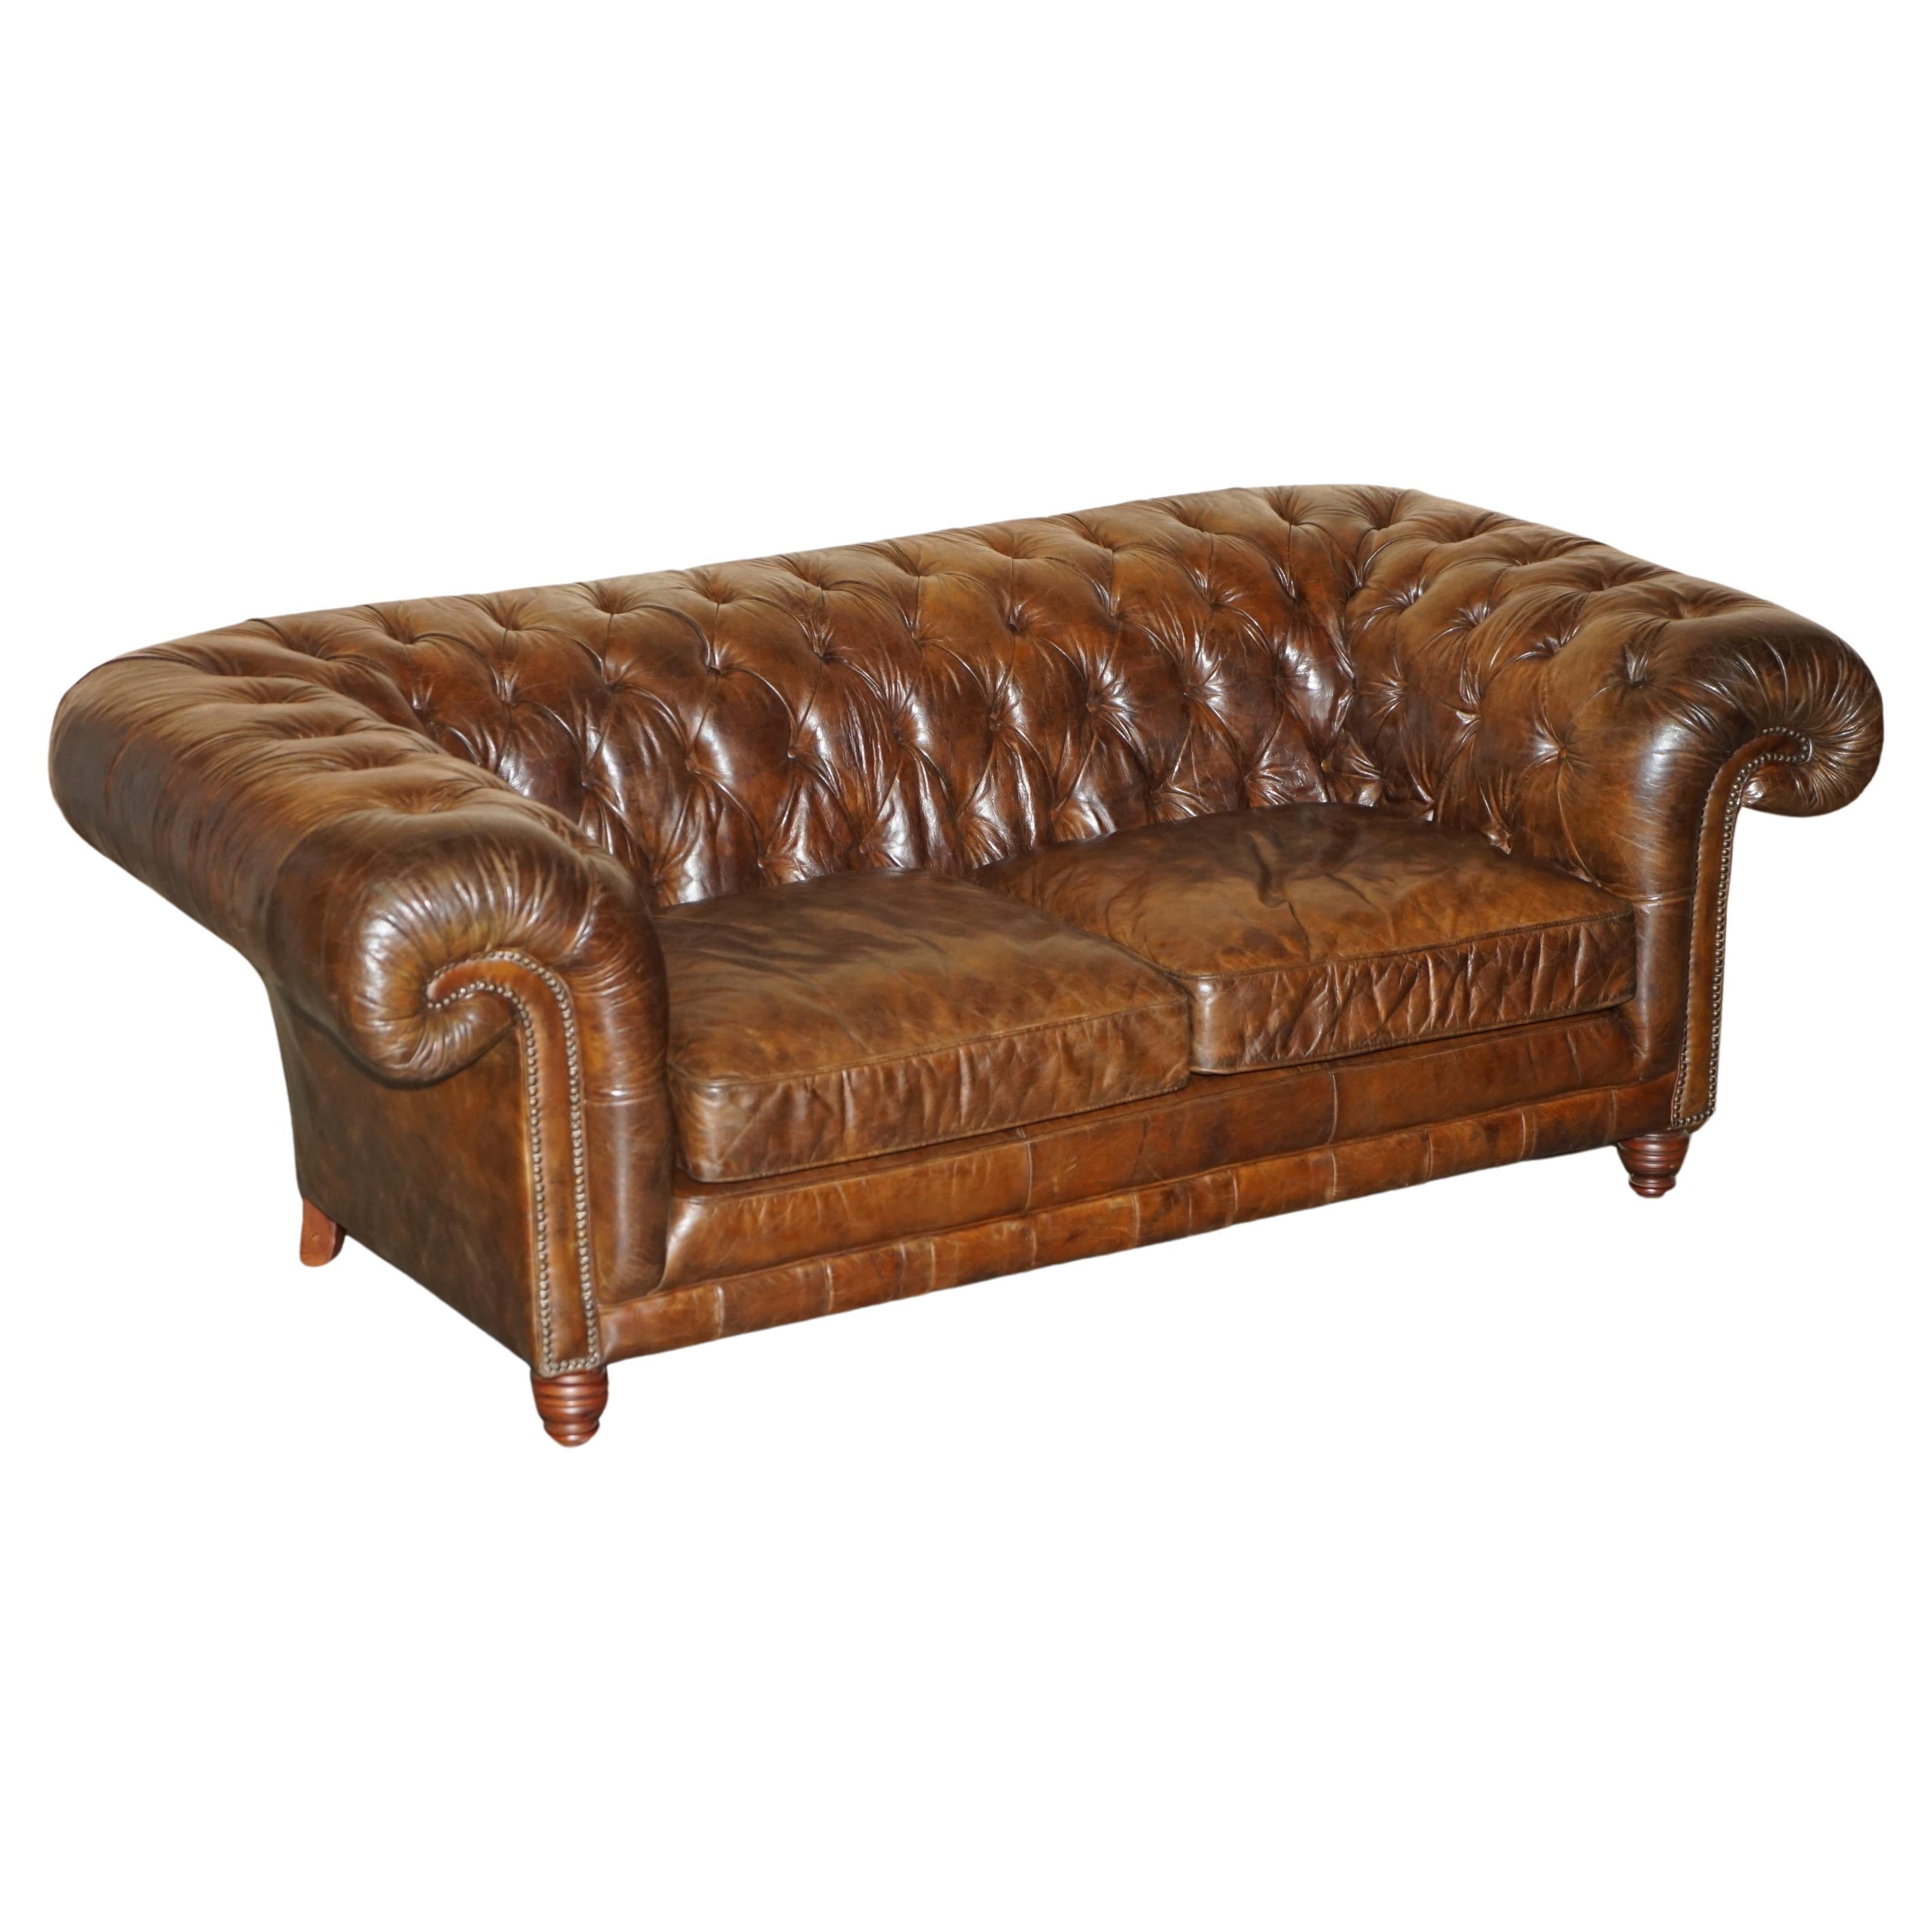 1 von 2 TIMOTHY OULTON HERiTAGE BROWN VINTAGE LEATHER CHESTERFIELD HALO SOFAS im Angebot